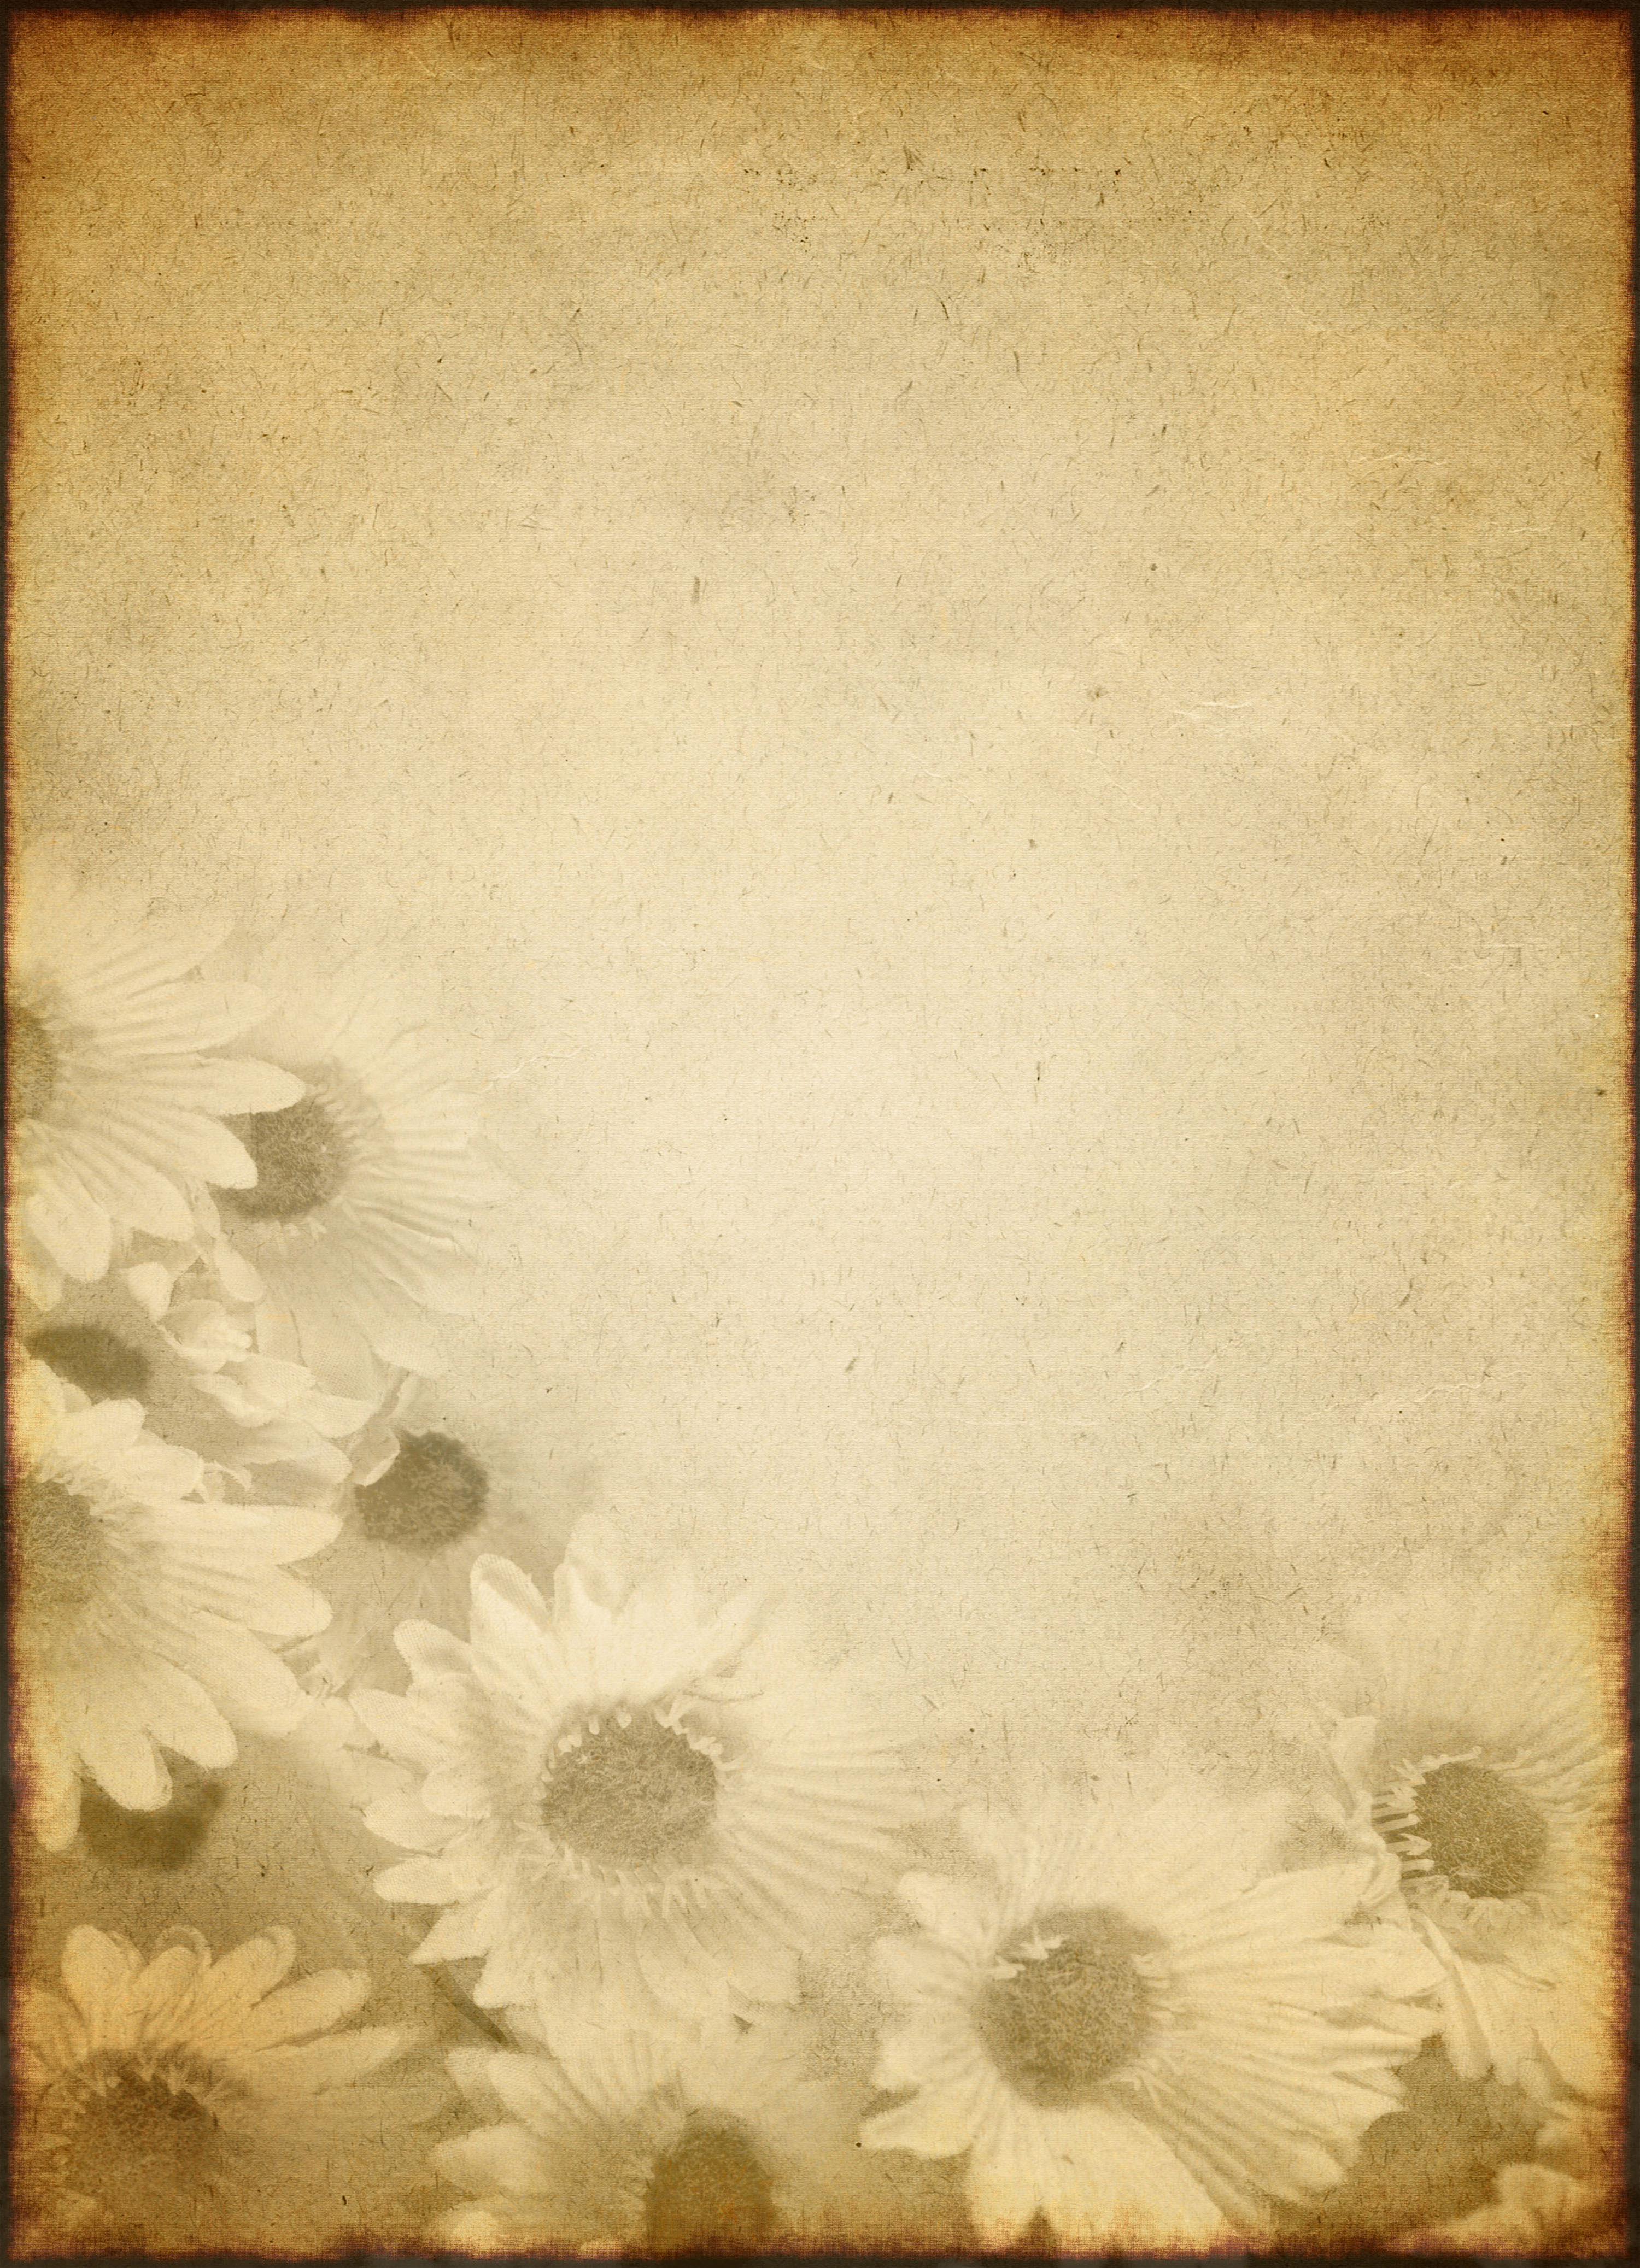 Old Paper Texture That Is Worn Faded And Has Floral Print